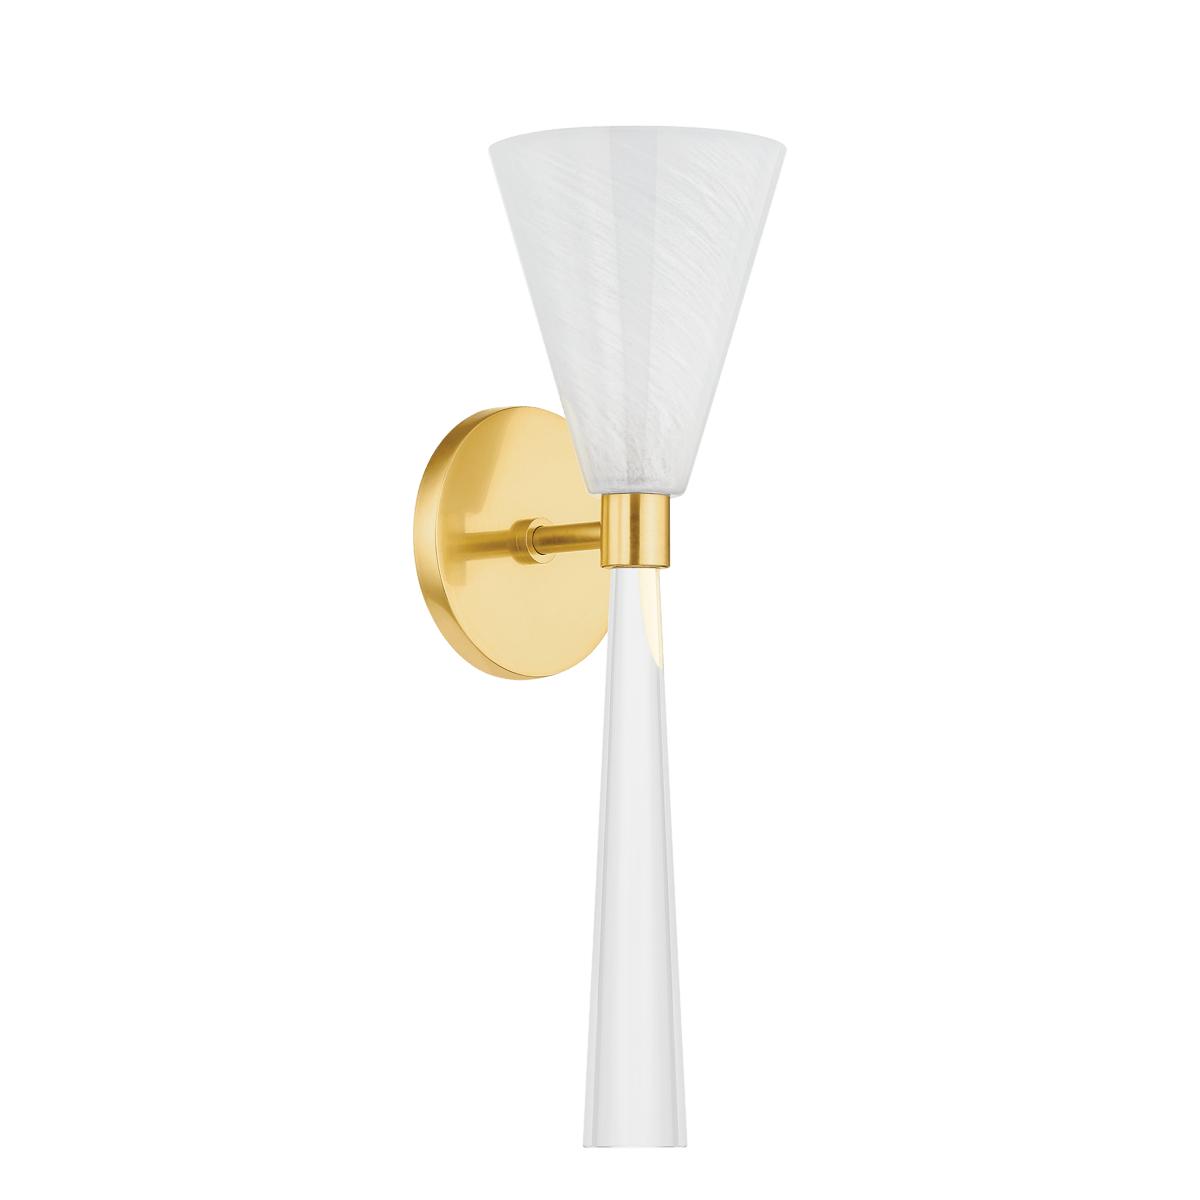 Hudson Valley Amara Wall Sconce Sconces H862101-AGB